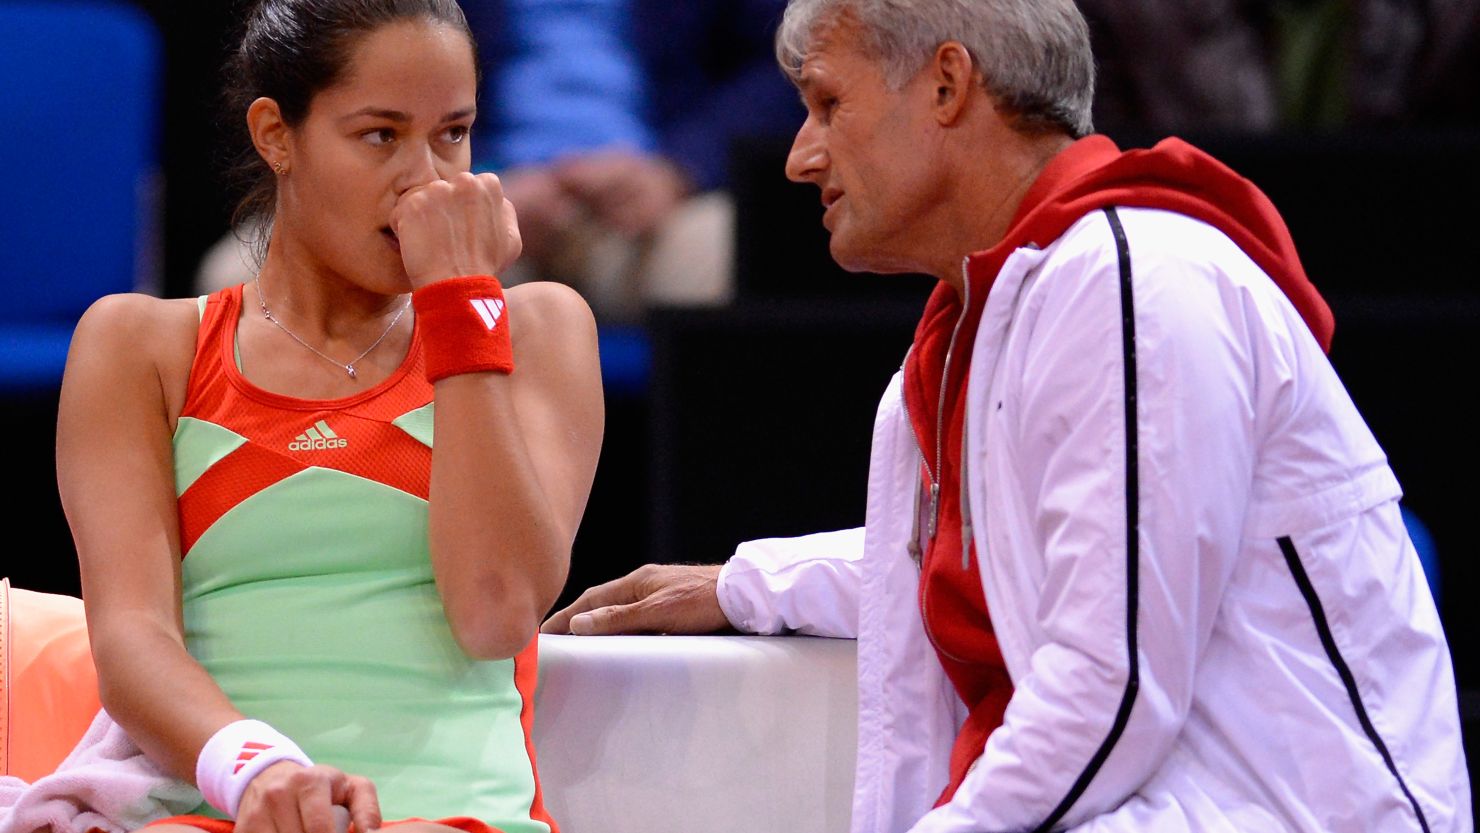 Nigel Sears, the coach of Ana Ivanovic and Andy Murray's father-in-law, collapsed at the Australian Open. 